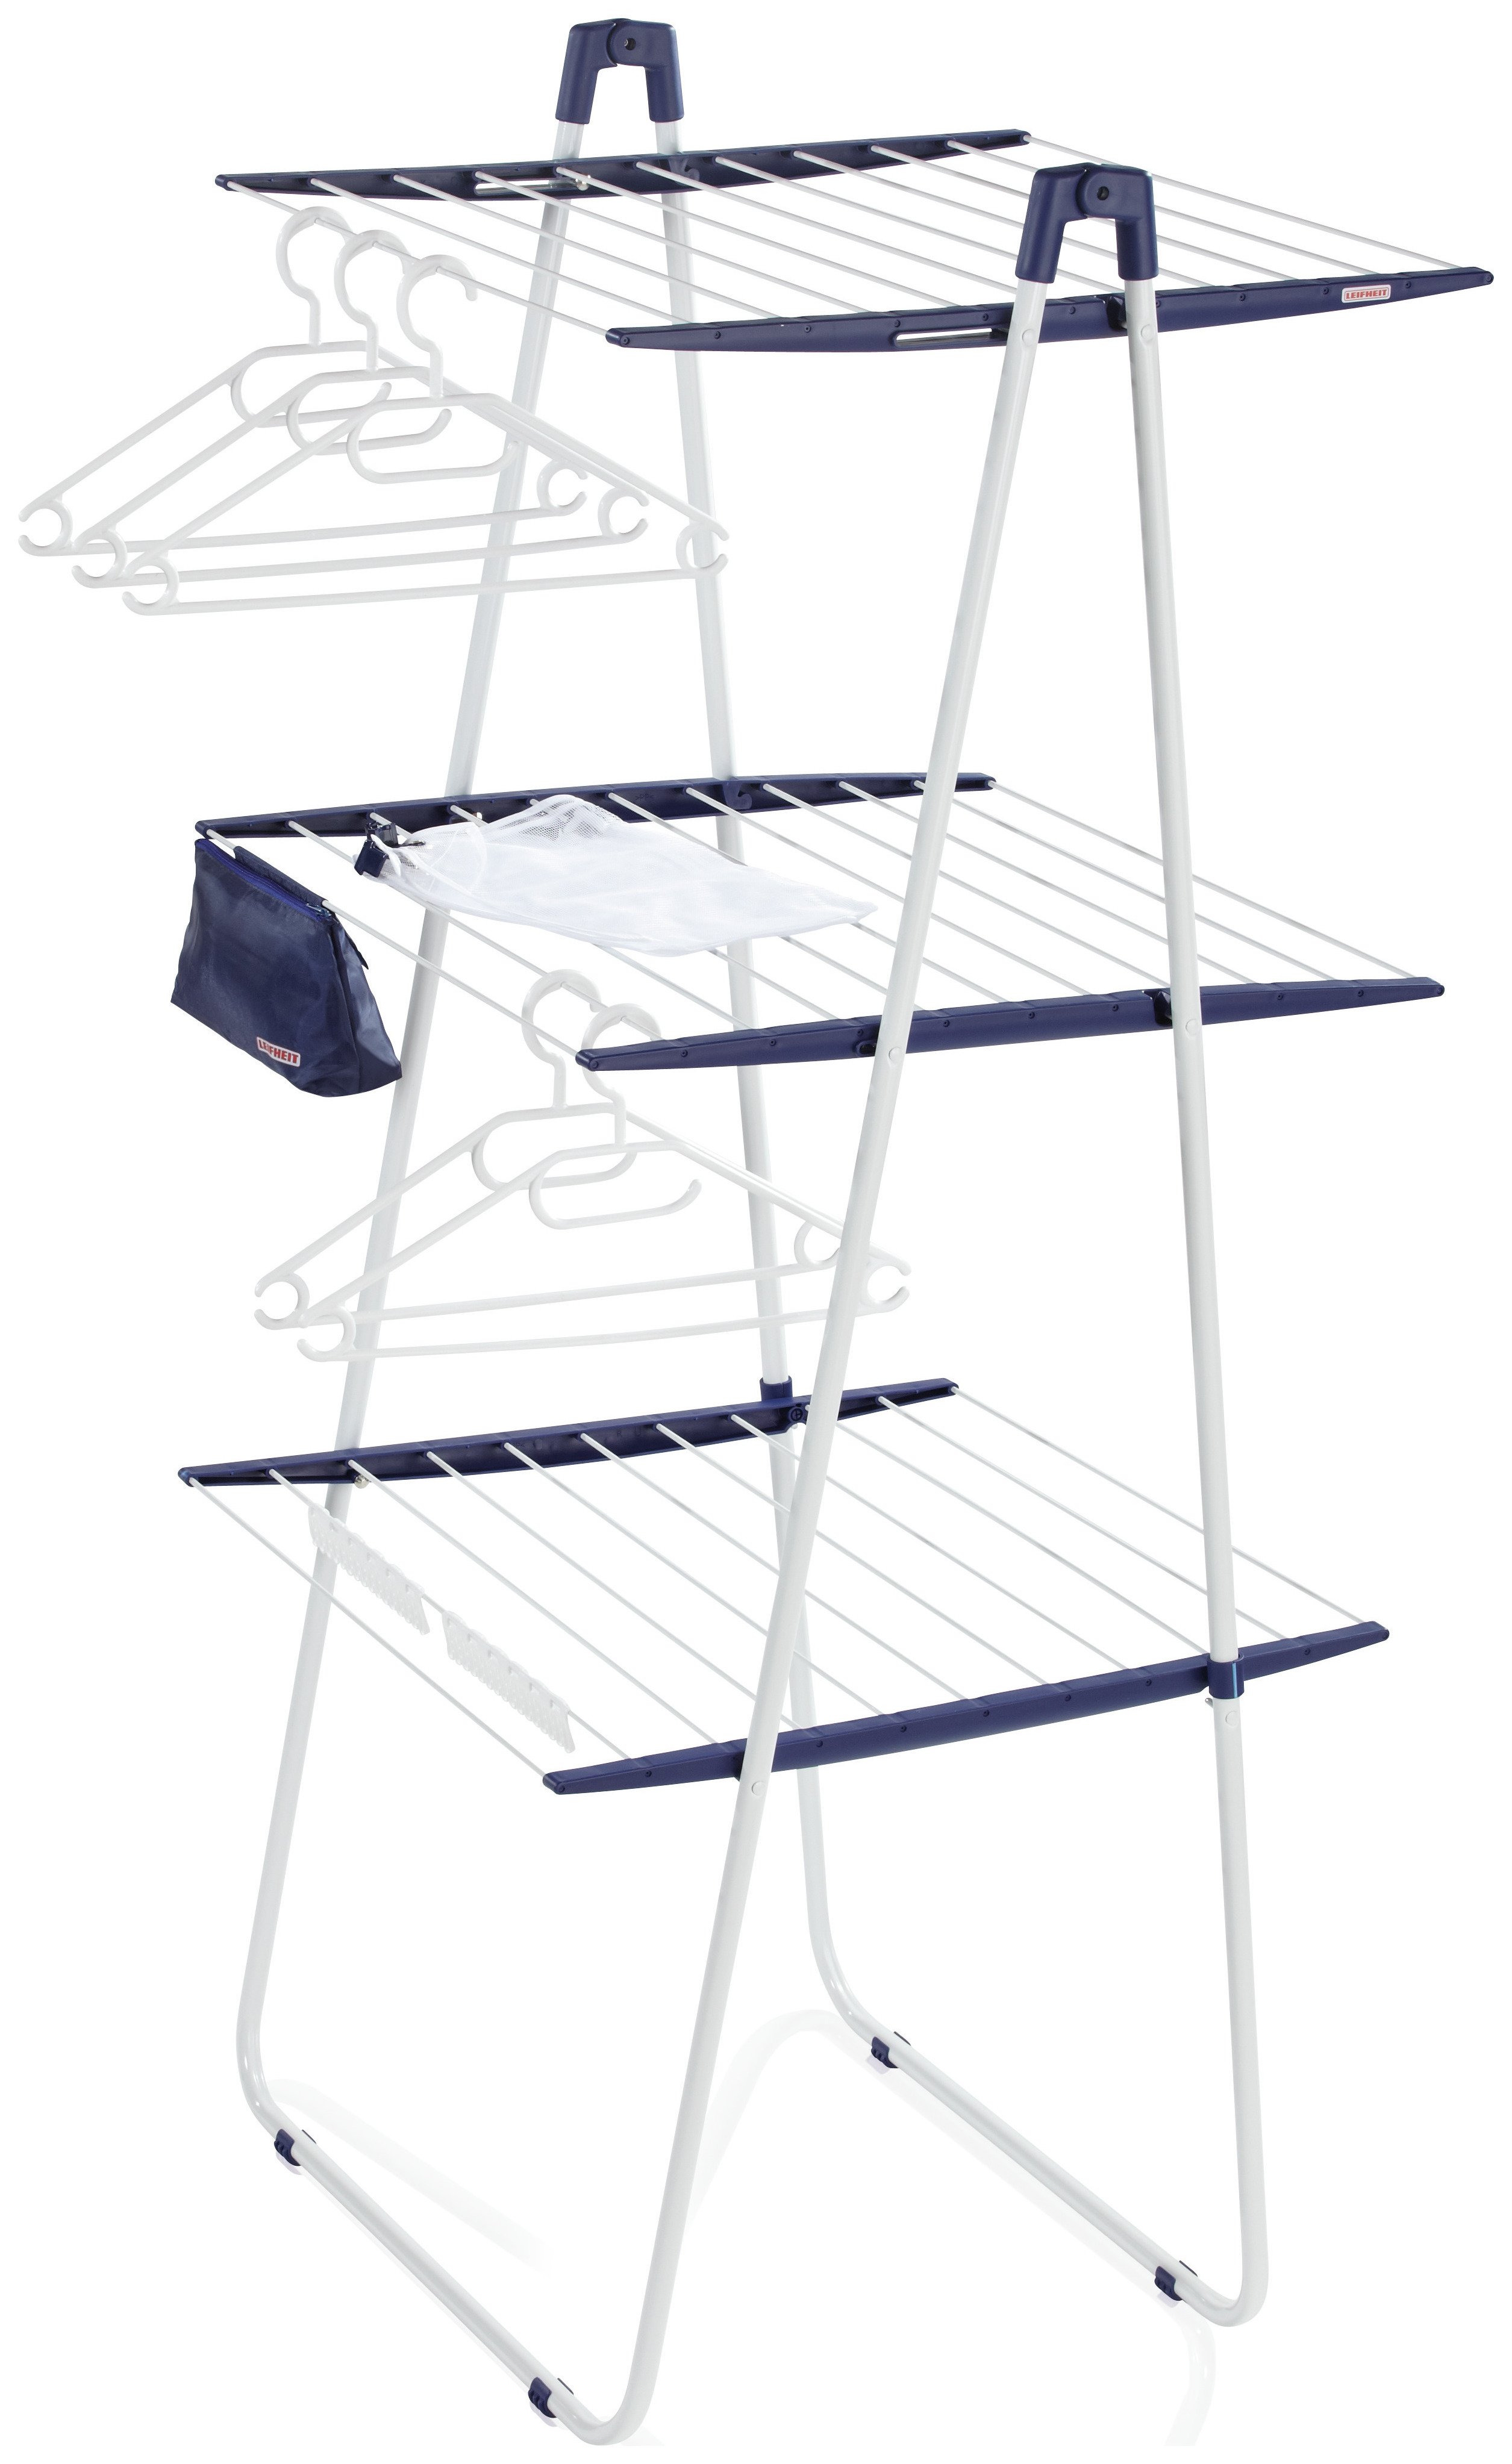 Leifheit Laundry Dryer Tower 200 Deluxe.